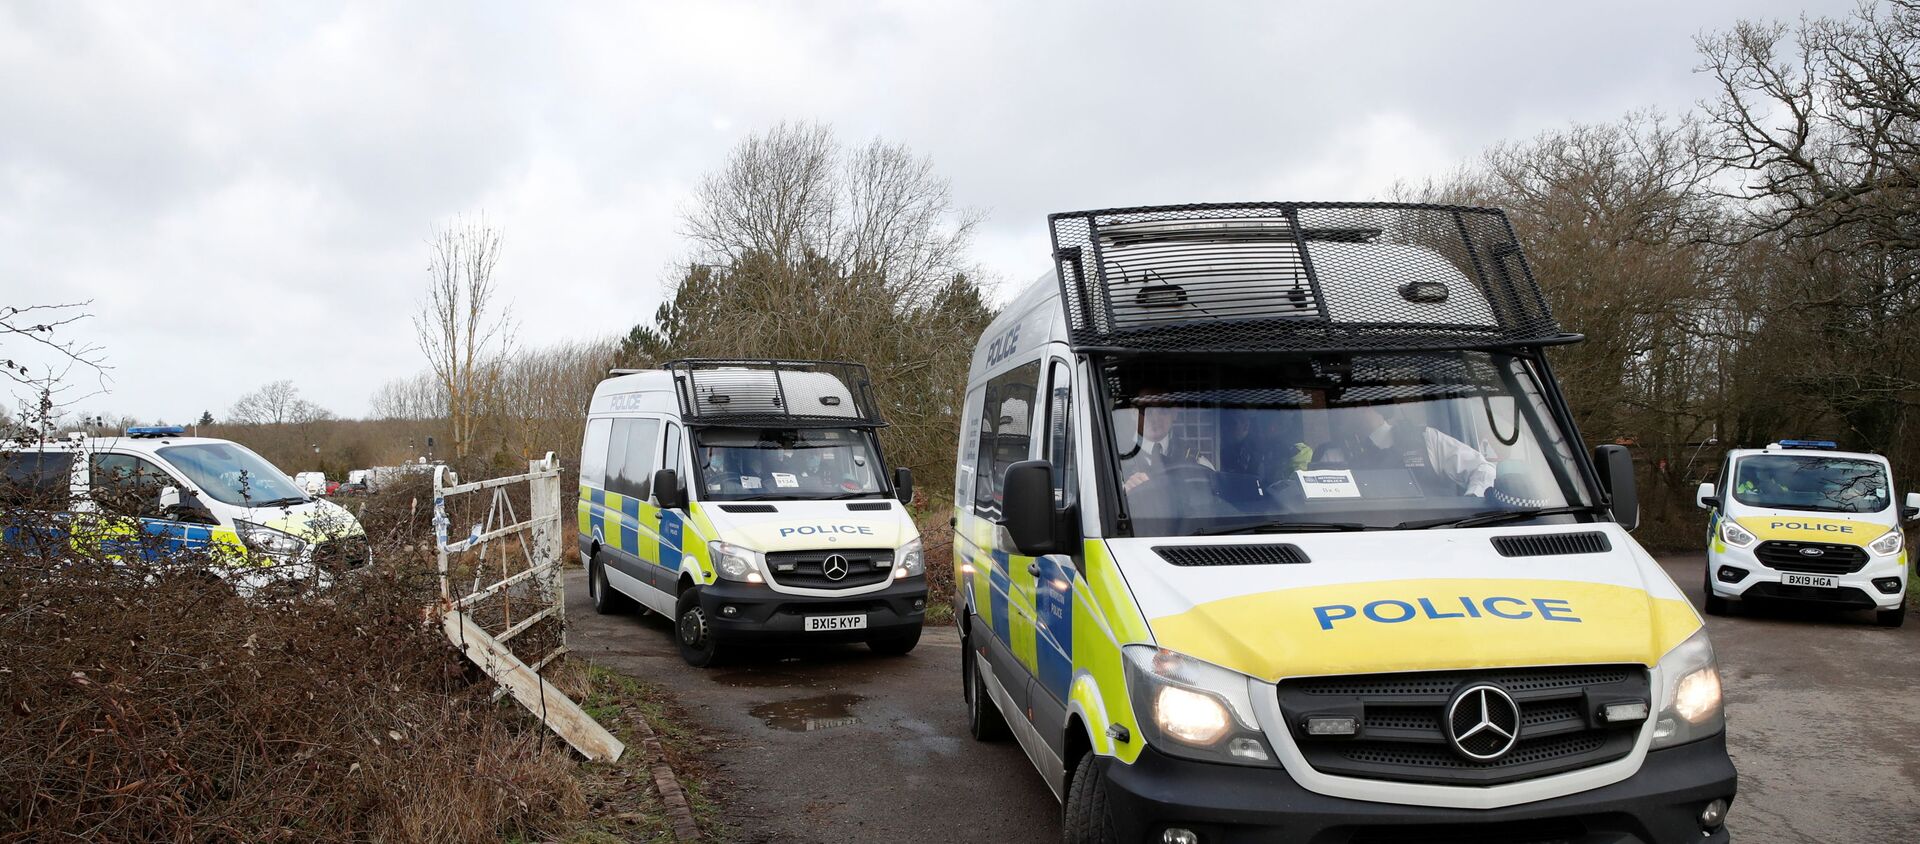 Police vehicles are seen at the Great Chart Golf & Leisure Country Club, as the investigation into the disappearance of Sarah Everard continues, in Ashford, Britain, March 11, 2021 - Sputnik International, 1920, 12.03.2021